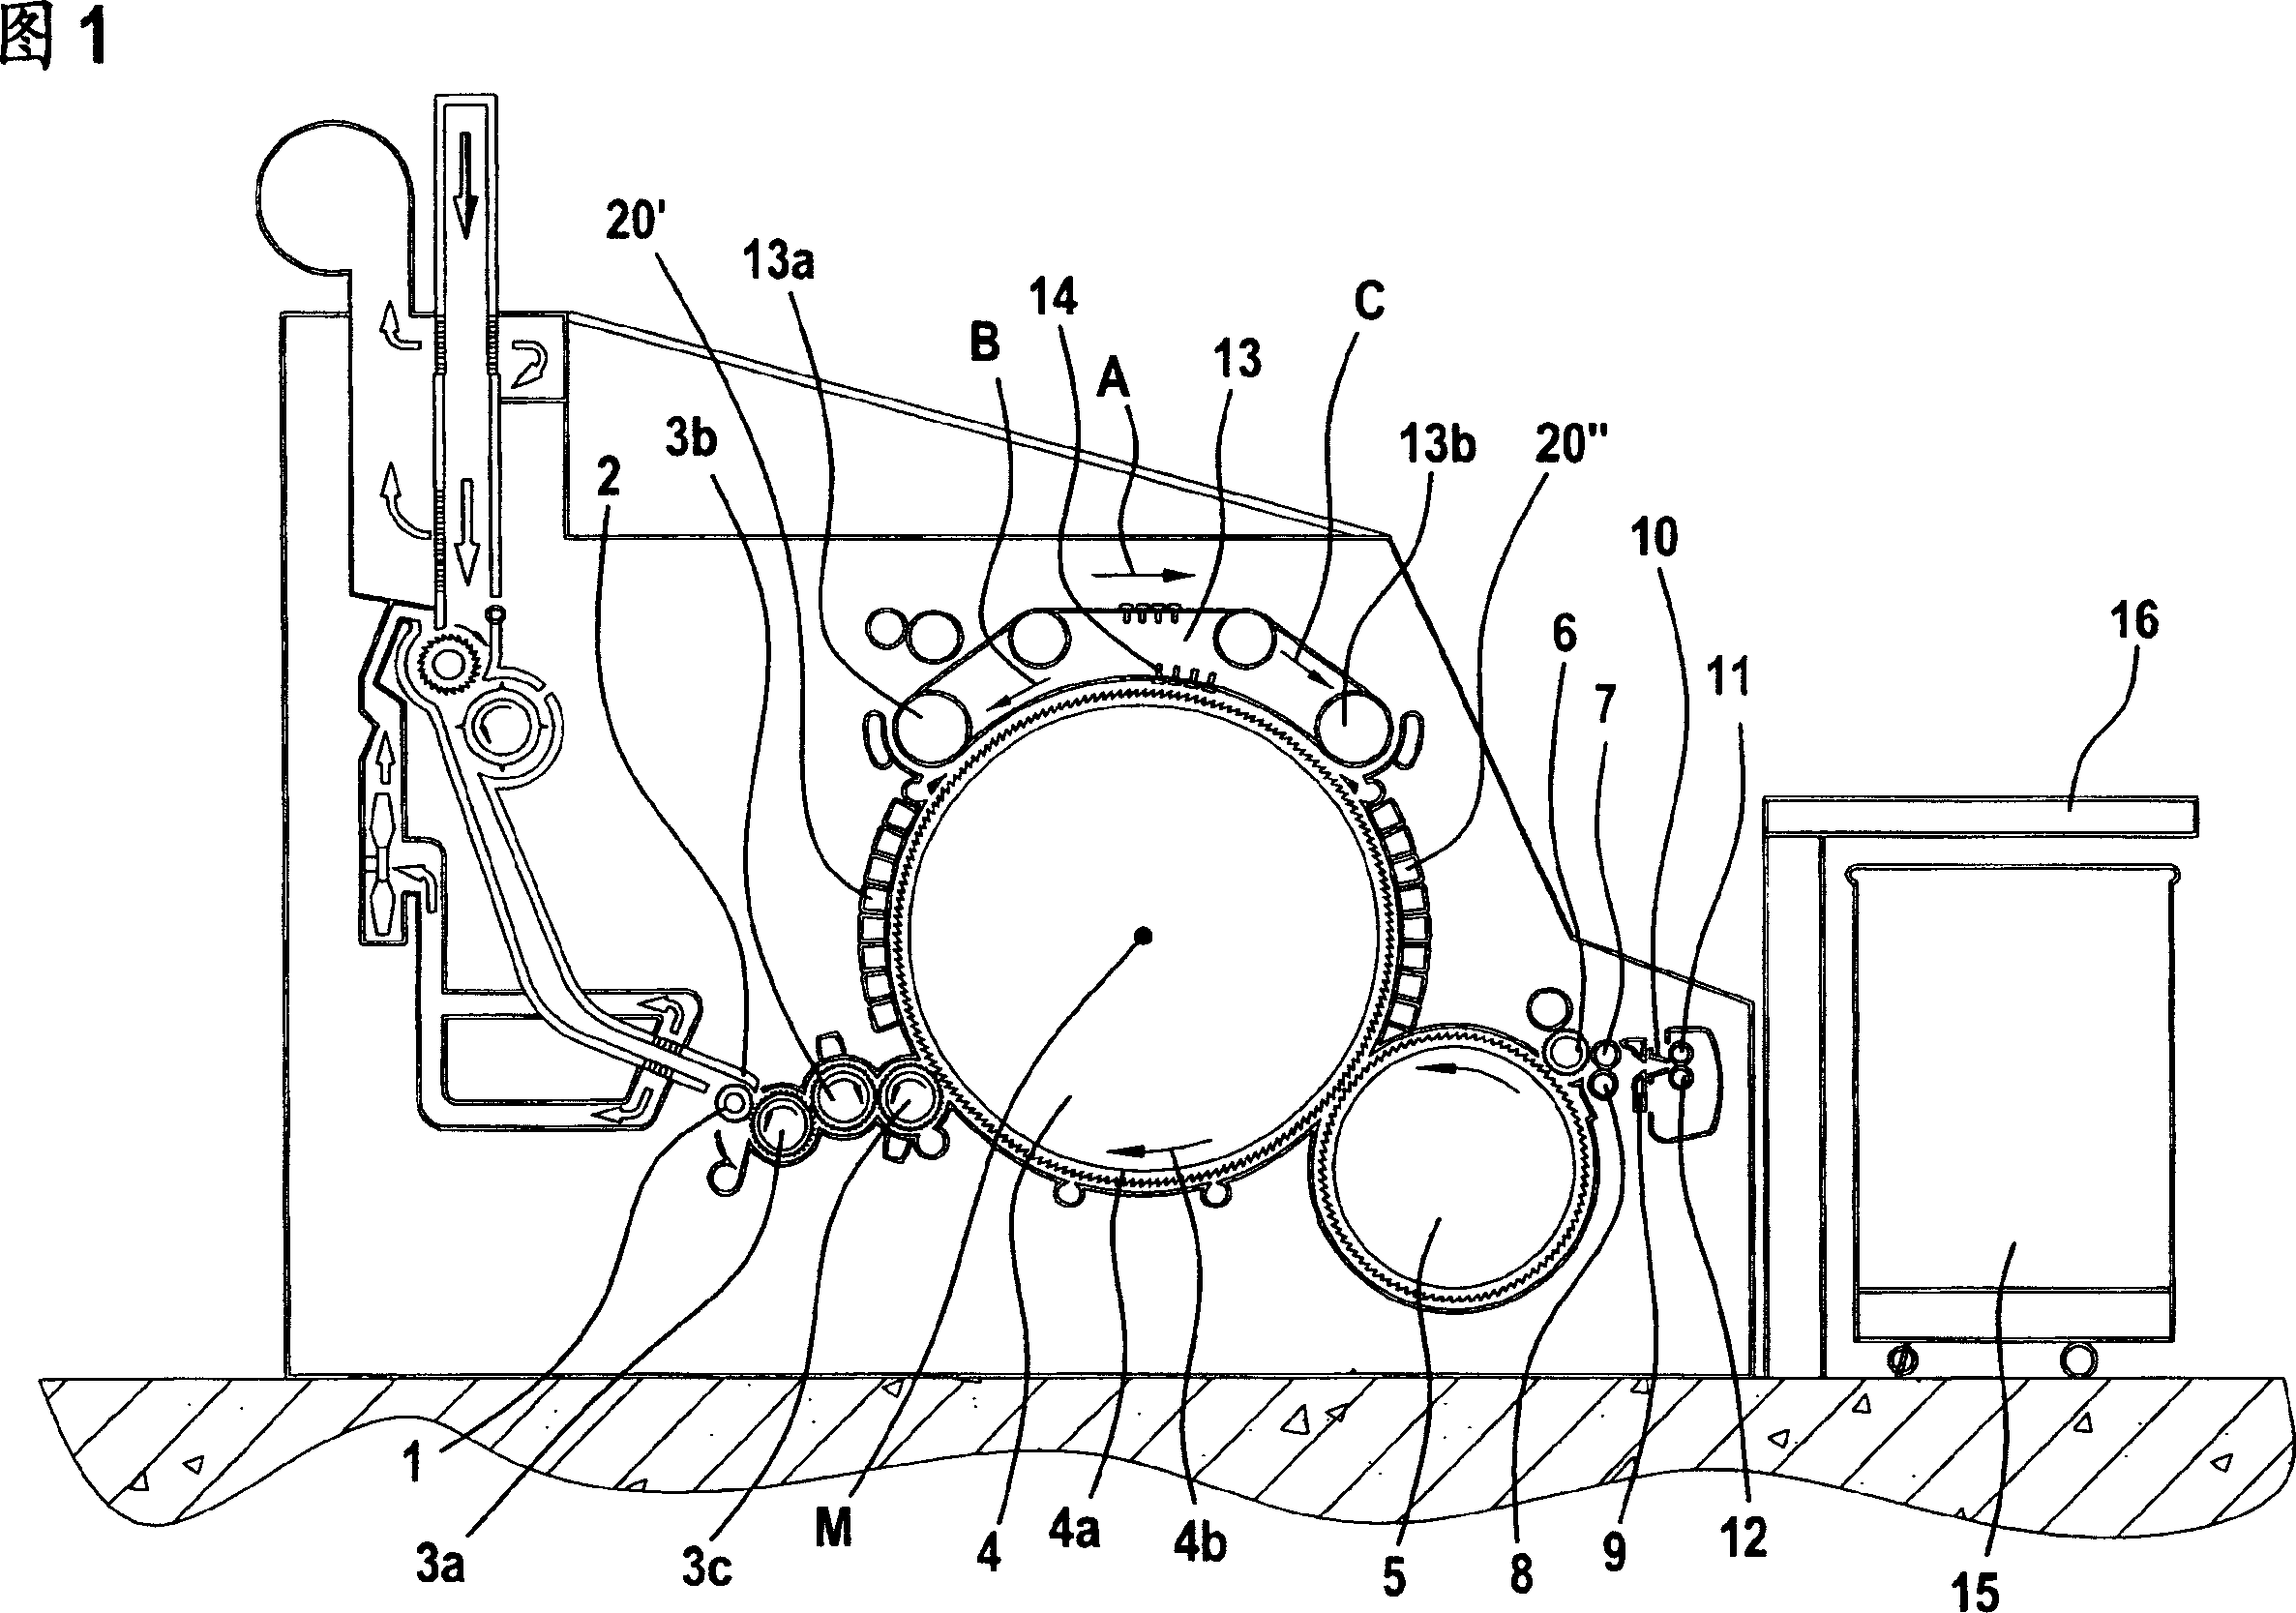 Device on the spinning preparation machine for monitoring and/or adjusting clearance of parts